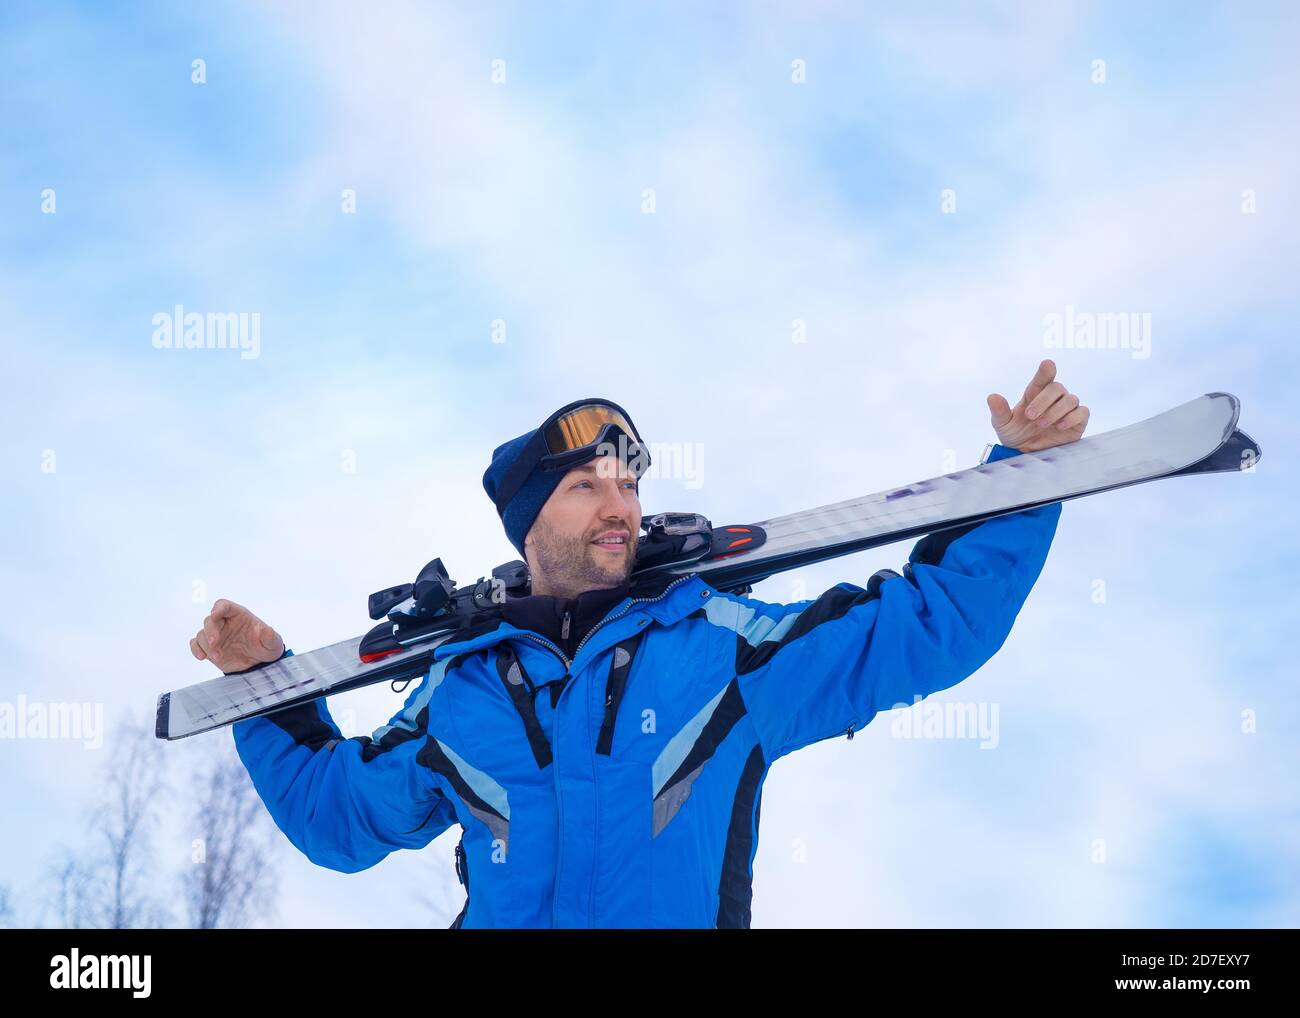 Smiling man with a ski make having rest before next downhill skiing. Man looking on the mountain. Active lifestyle and open air sports concept. Stock Photo